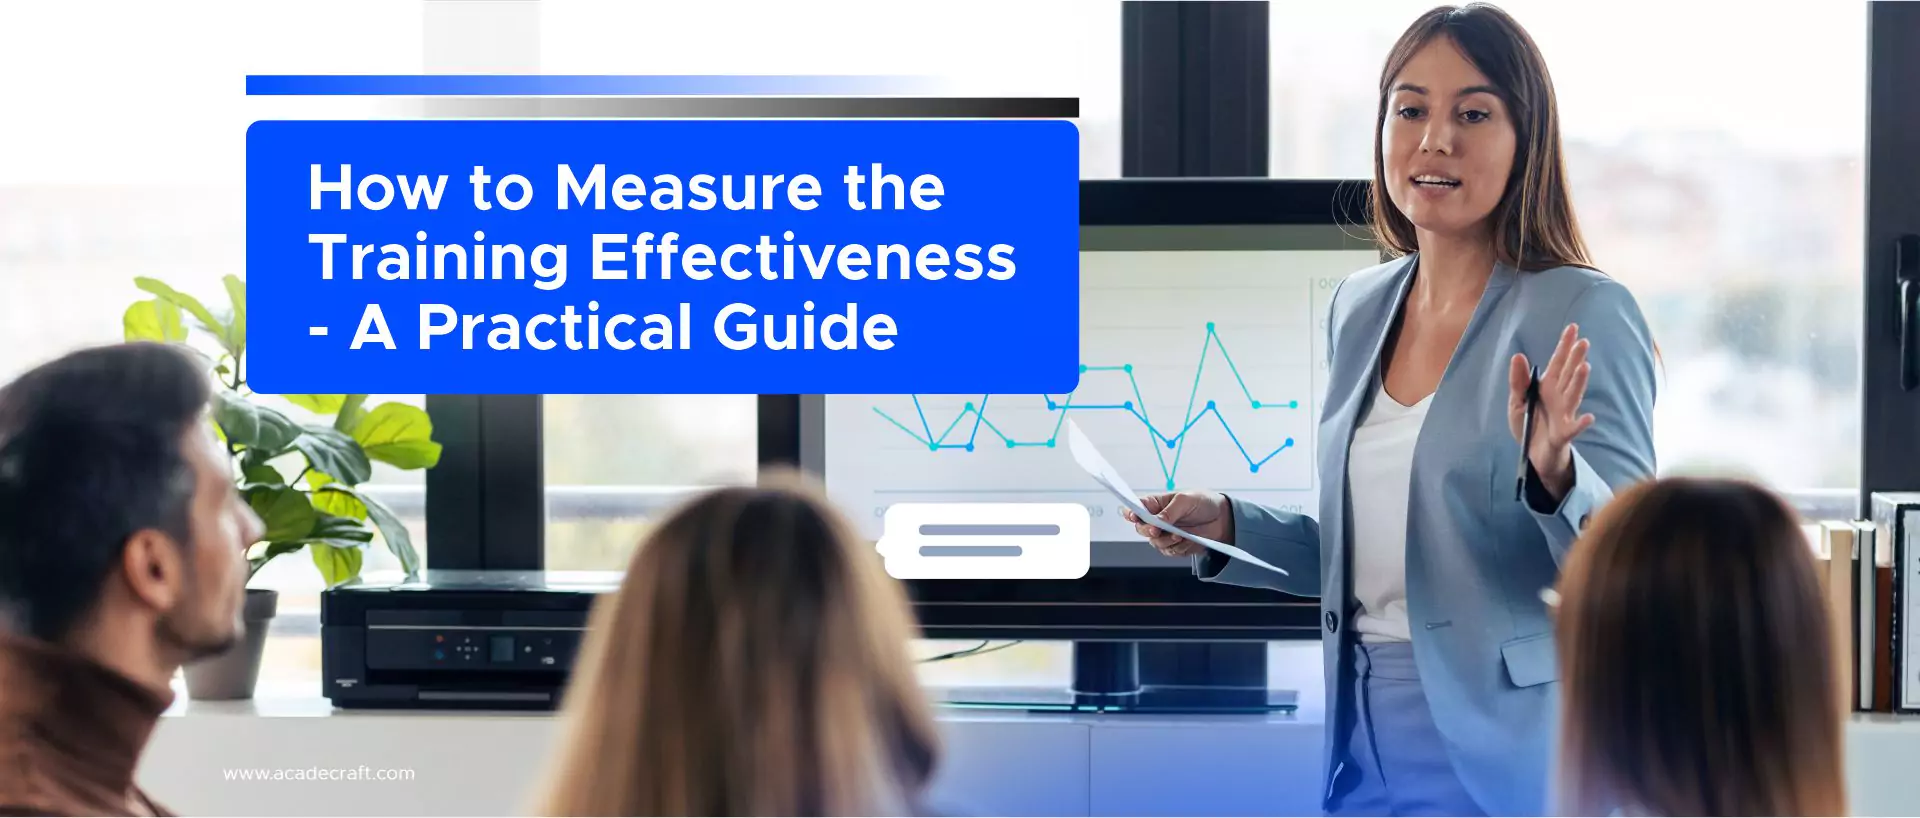 How to Measure the Training Effectiveness - A Practical Guide